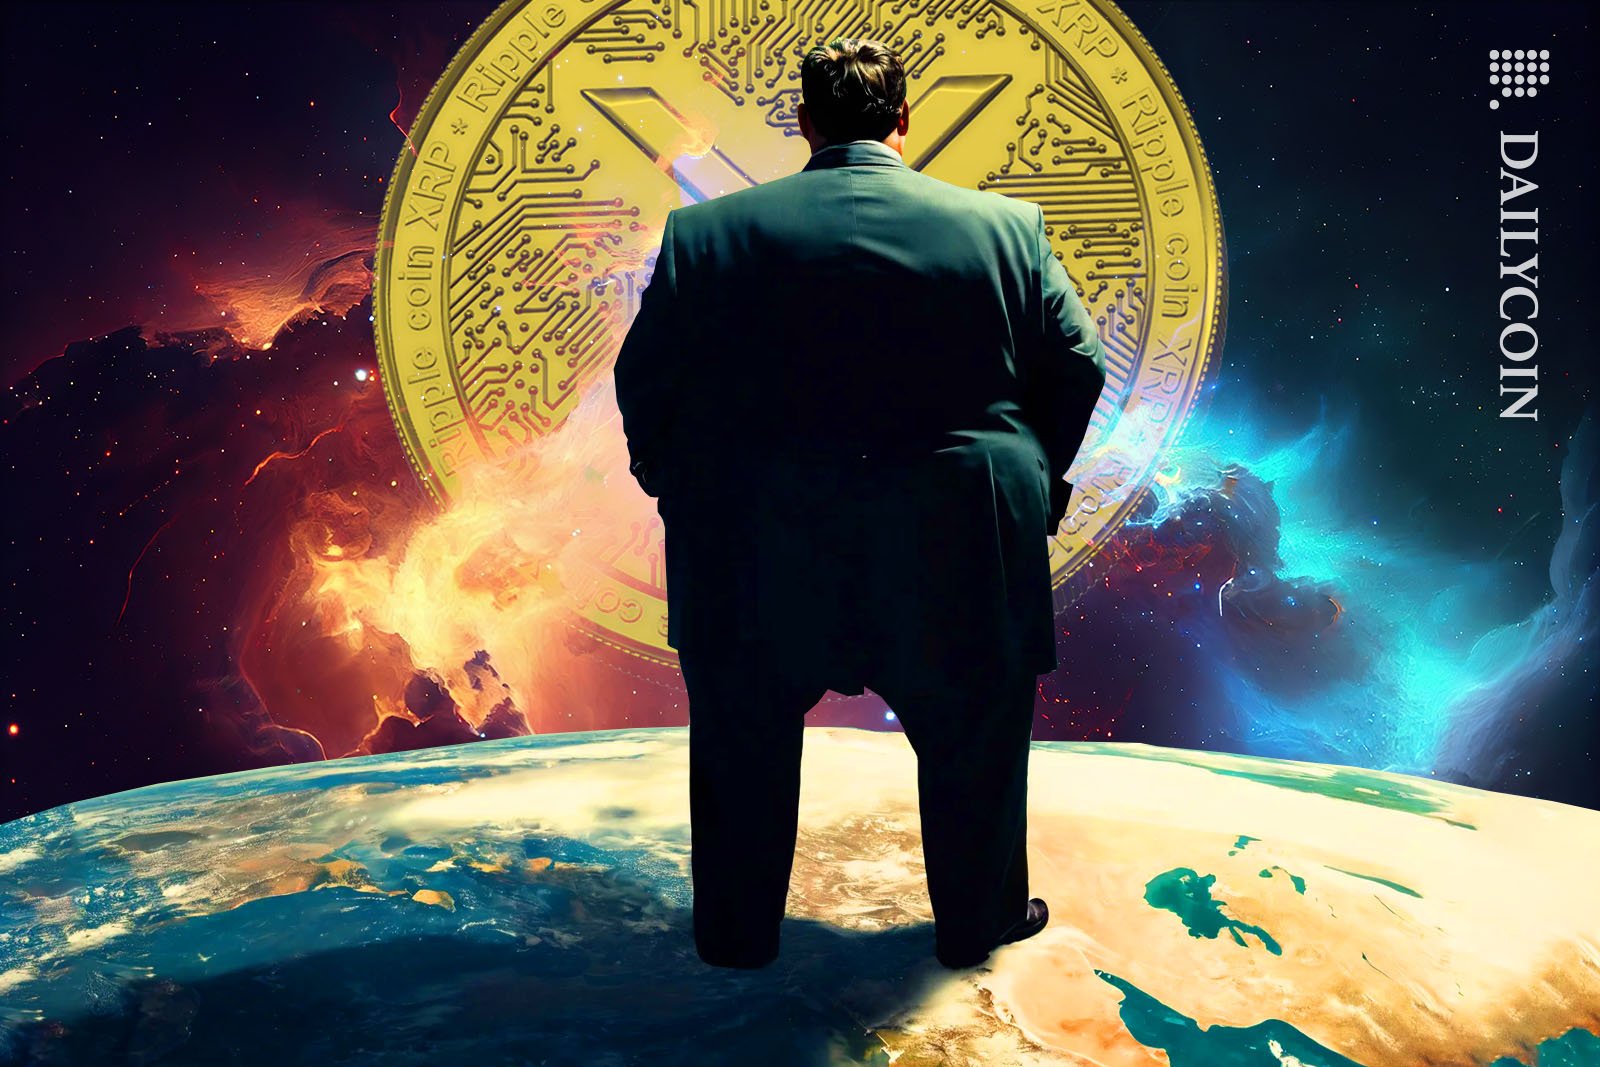 Big suited man staring at a giant XRP coin in space.